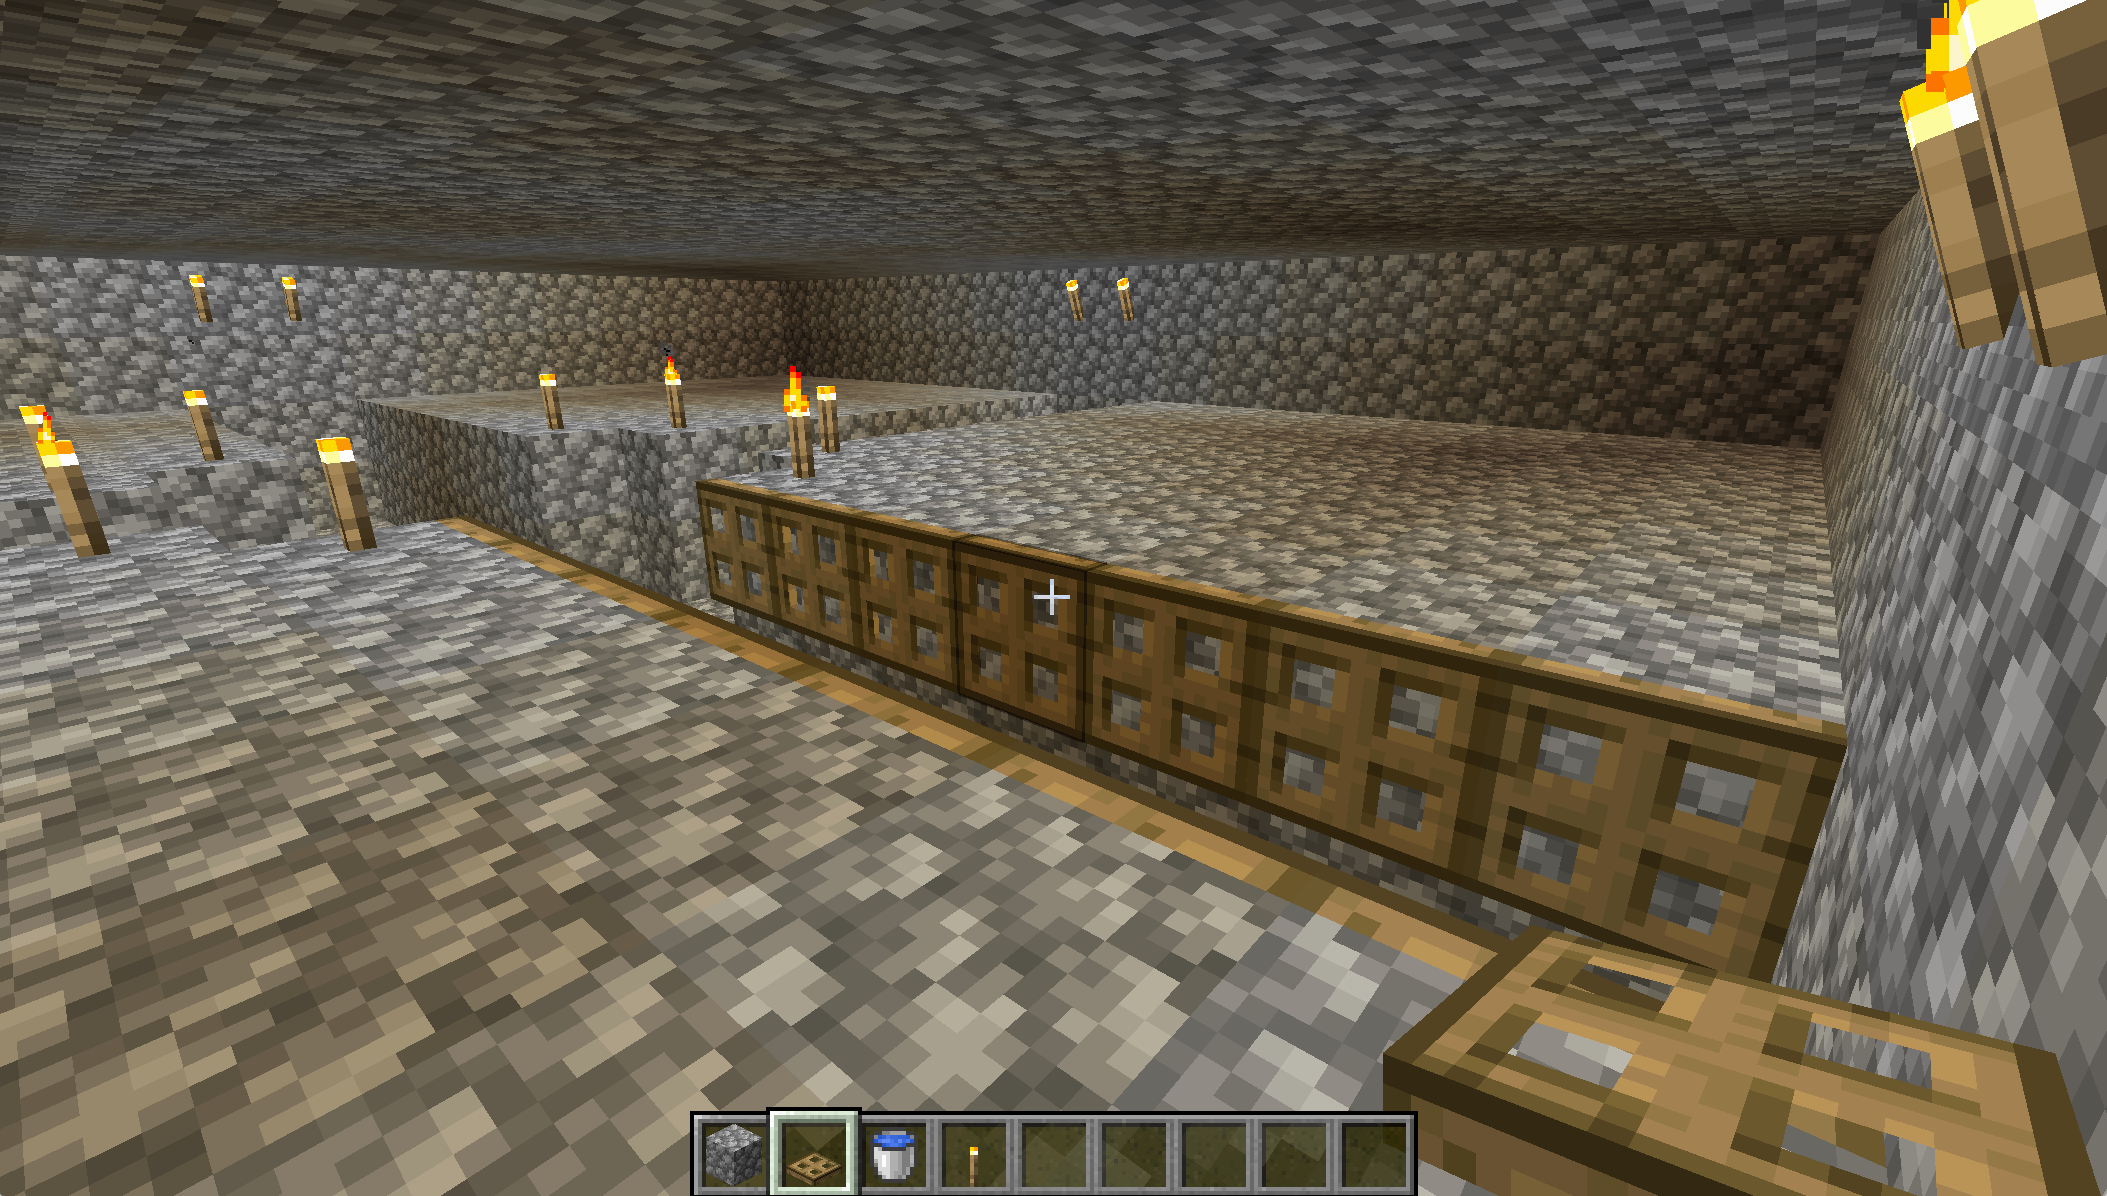 A screenshot from Minecraft, showing a gap lined by opened trapdoors.